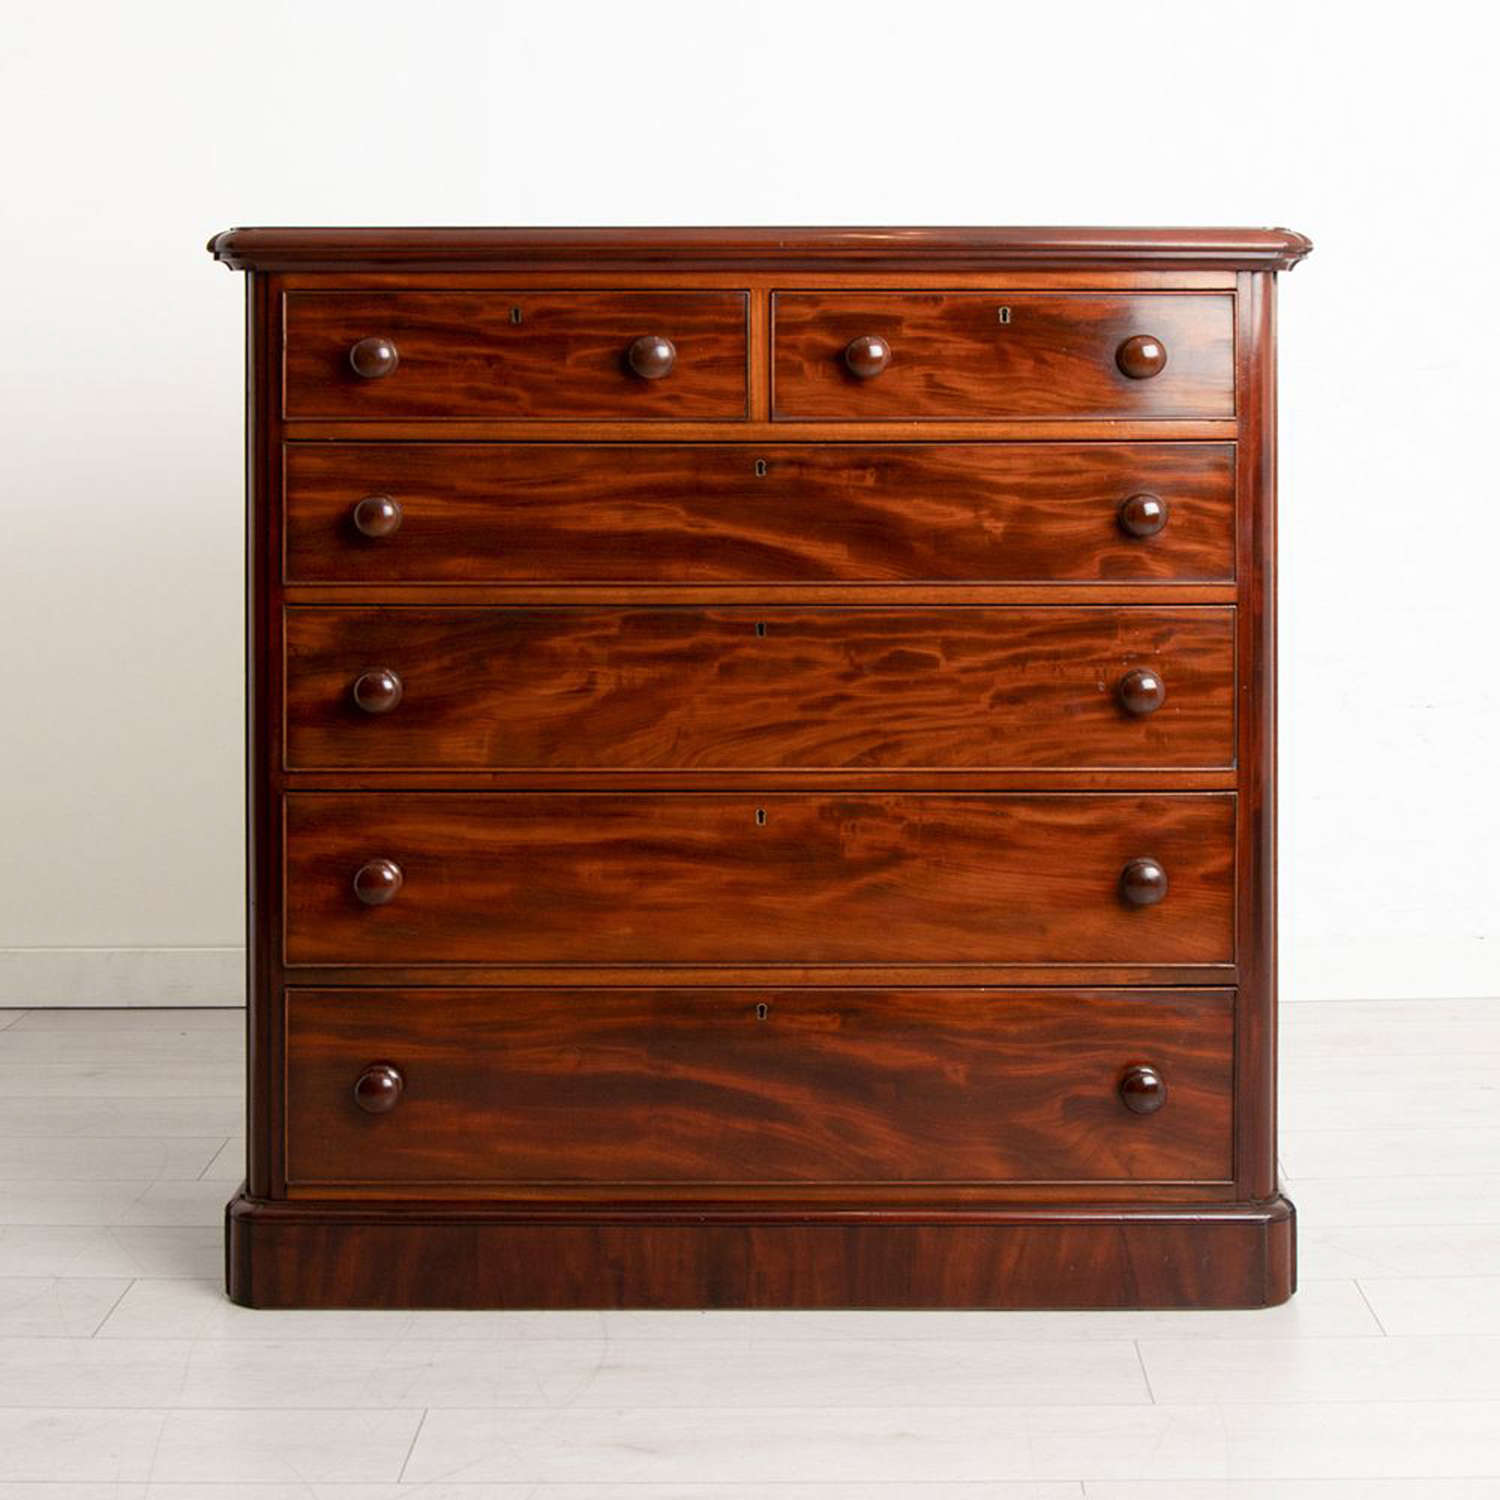 Antique Flame Mahogany Chest of Drawers c.1860